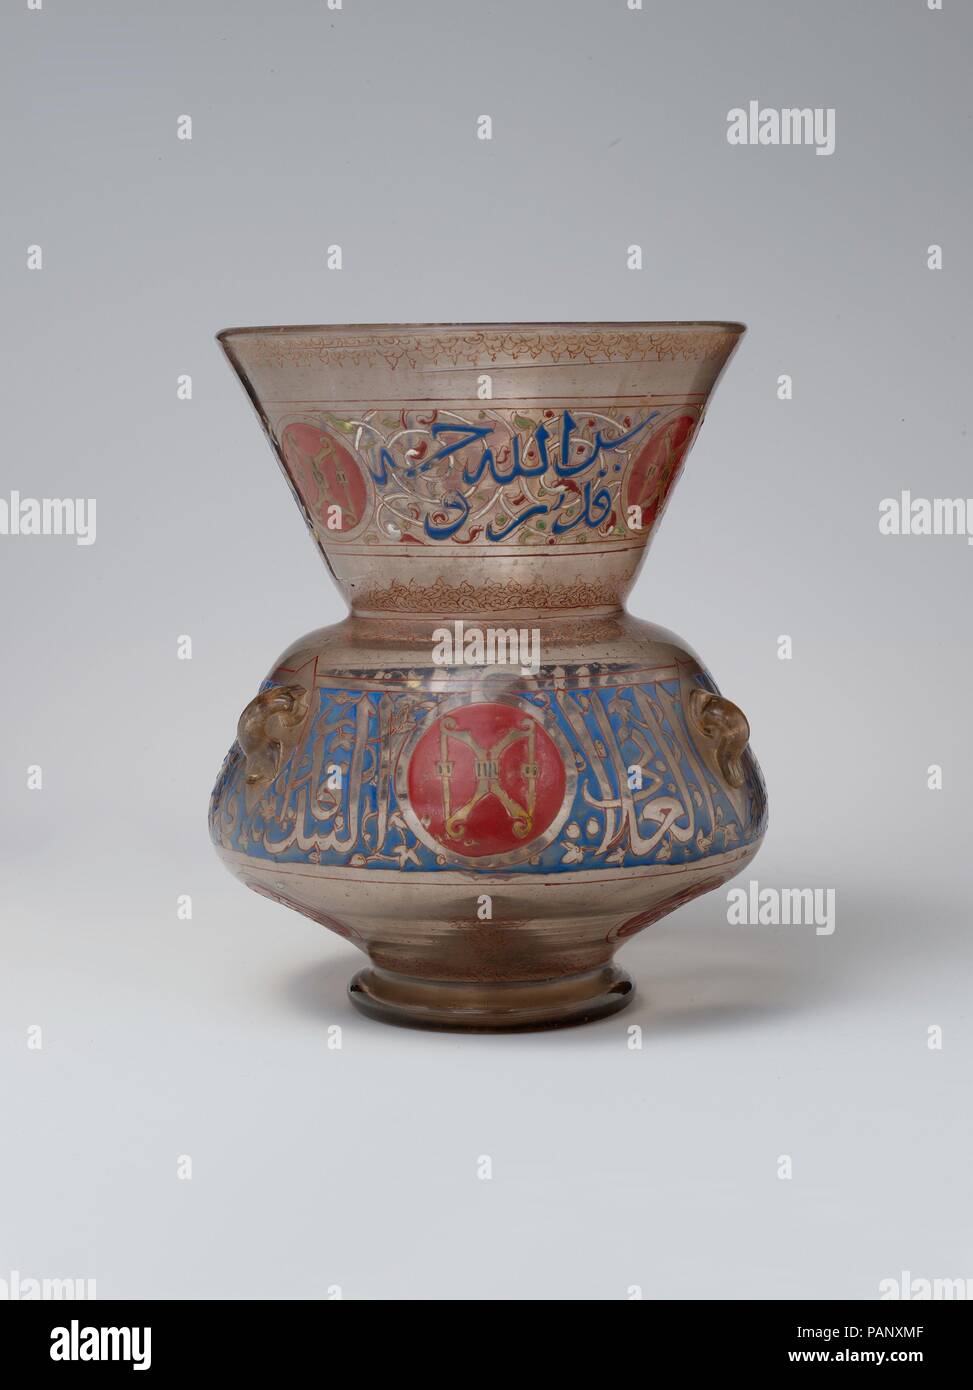 Mosque Lamp for the Mausoleum of Amir Aydakin al-'Ala'i al-Bunduqdar. Dimensions: H. 10 3/8 in. (26.4 cm)  Diam. of rim 8 1/4 in. (21 cm). Date: shortly after 1285.  This lamp's inscriptions reveal that it was ordered for Aidakin's mausoleum (turba), a building still standing in Cairo. Mamluk amirs adopted emblems, often connected with their ceremonial roles at court, which decorated the objects and buildings they commissioned. Here, the motif of two gold crossbows against a red shield illustrates the office of bunduqdar (bow-keeper). Museum: Metropolitan Museum of Art, New York, USA. Stock Photo